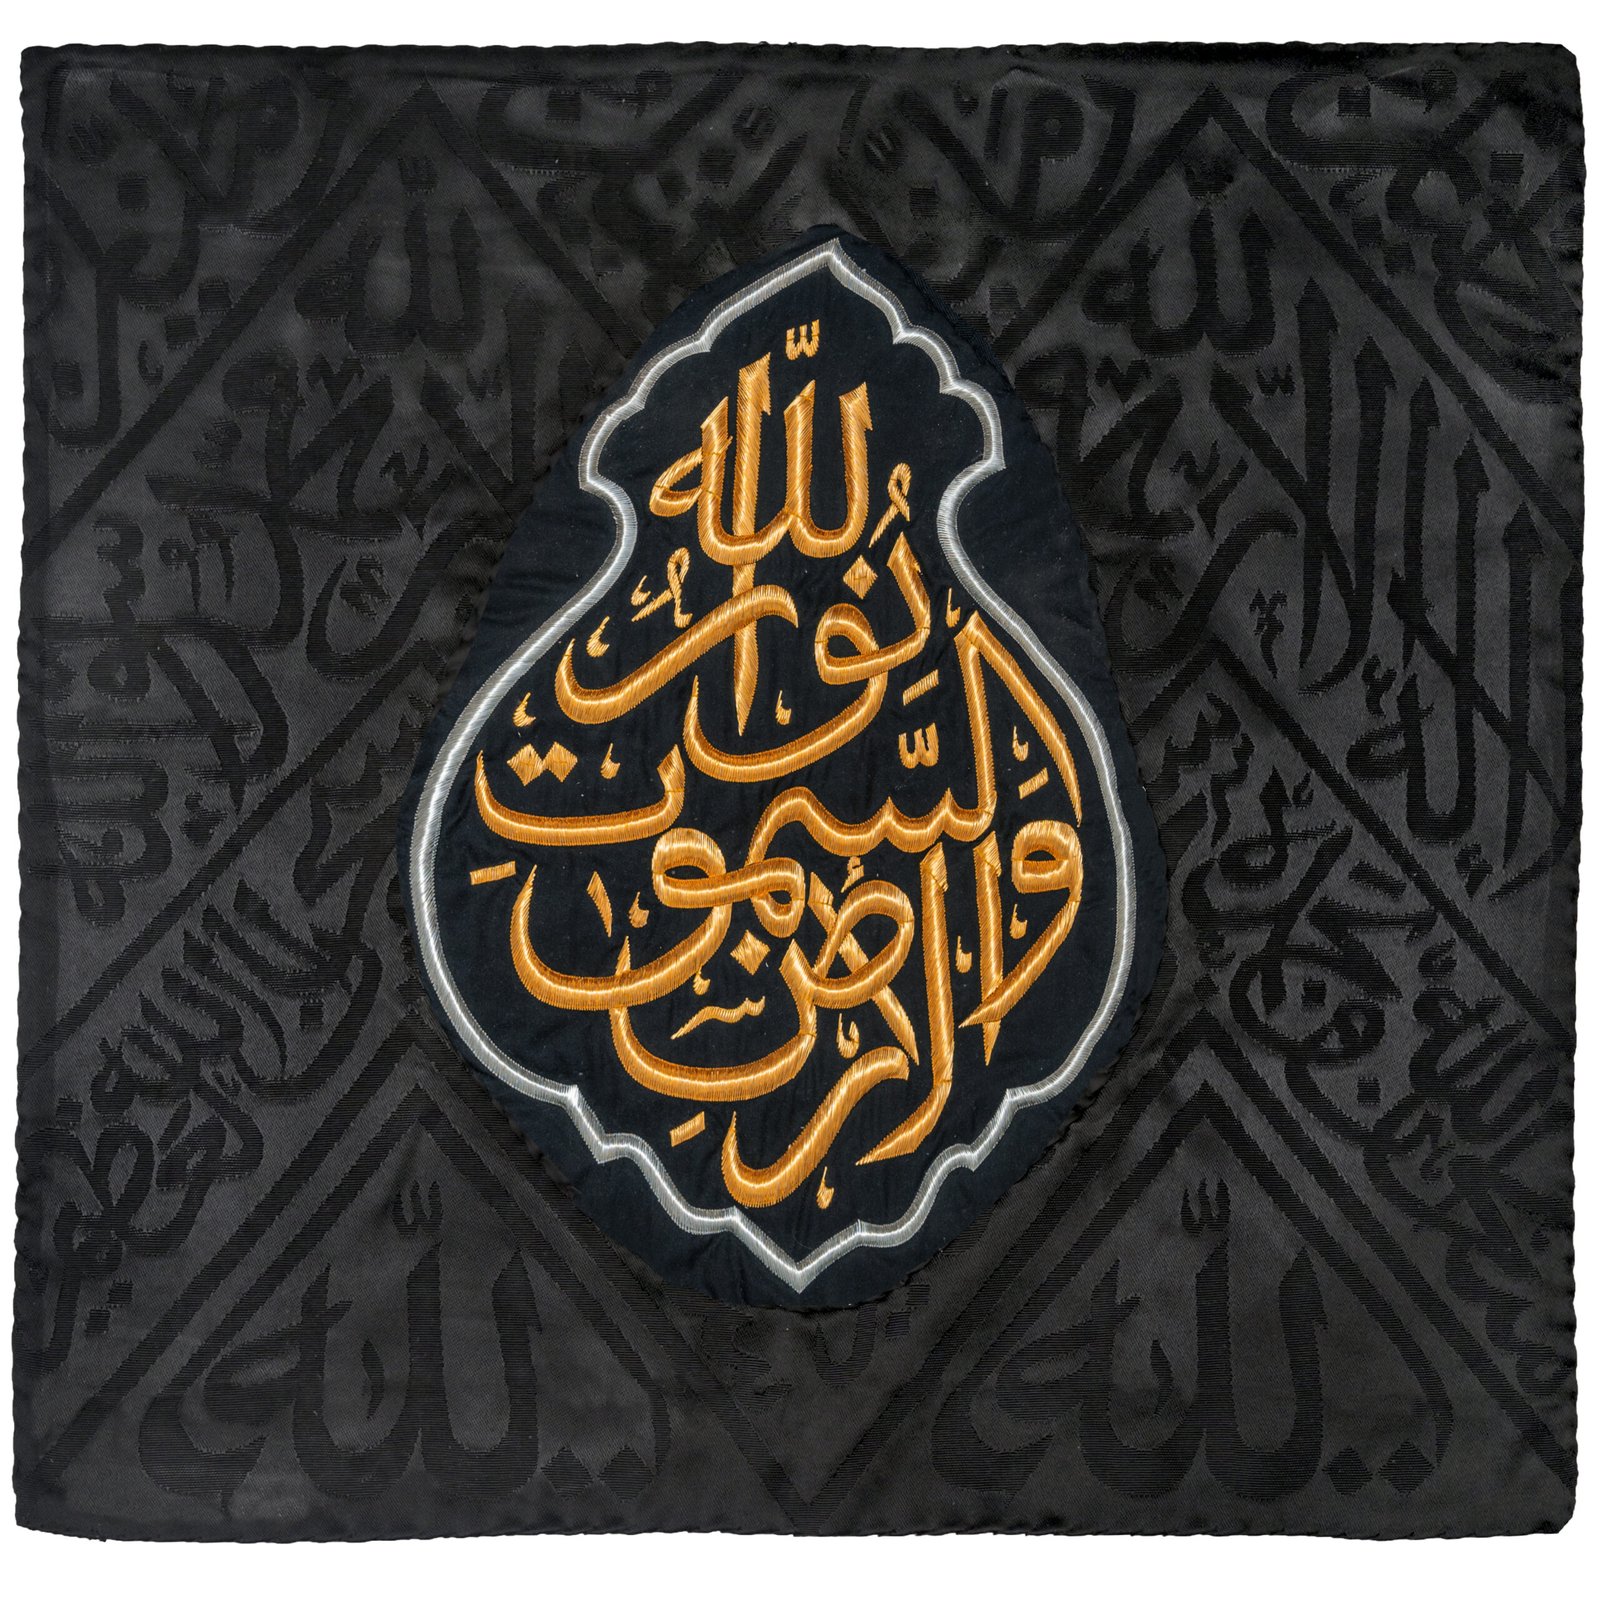 Certified kiswa kaaba for home decor most precious name of Allah SWT / kaaba kiswa /Islamic relics / ideal gift for Muslim